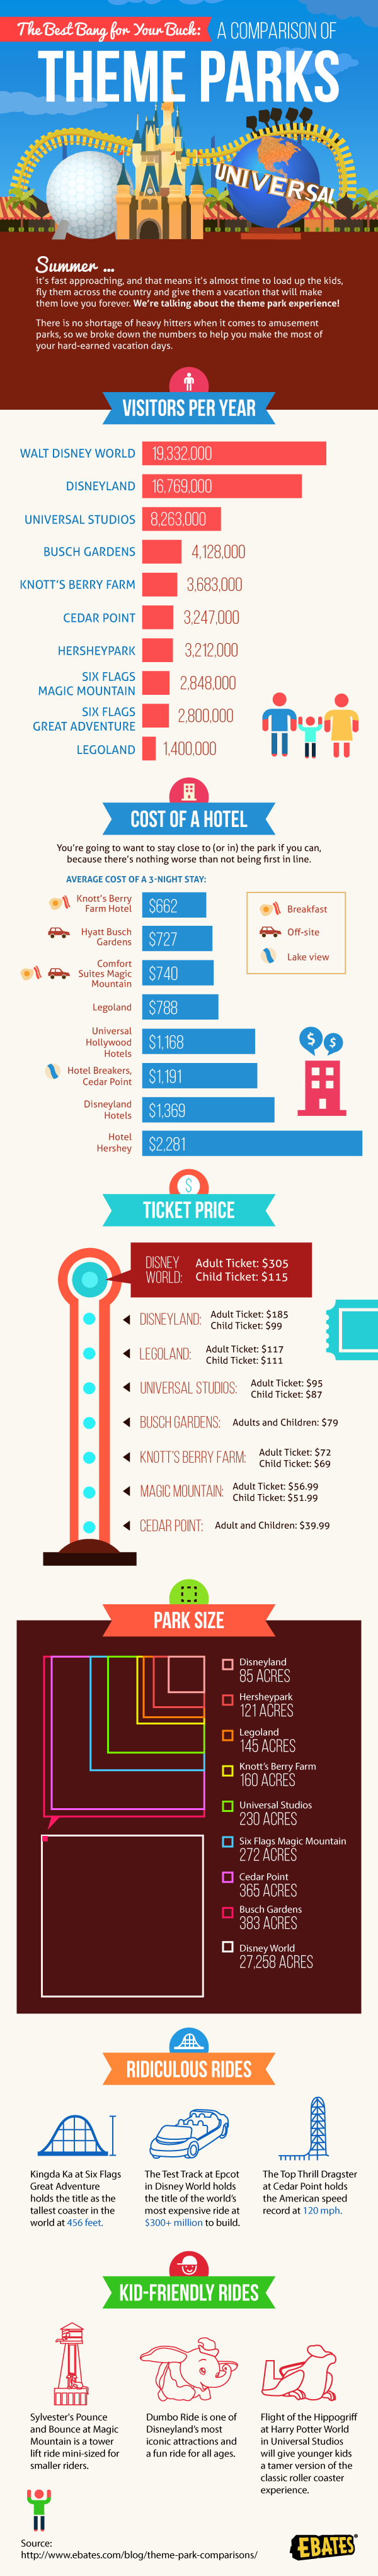 The Best Bang for Your Buck. A Comparison of Theme Parks